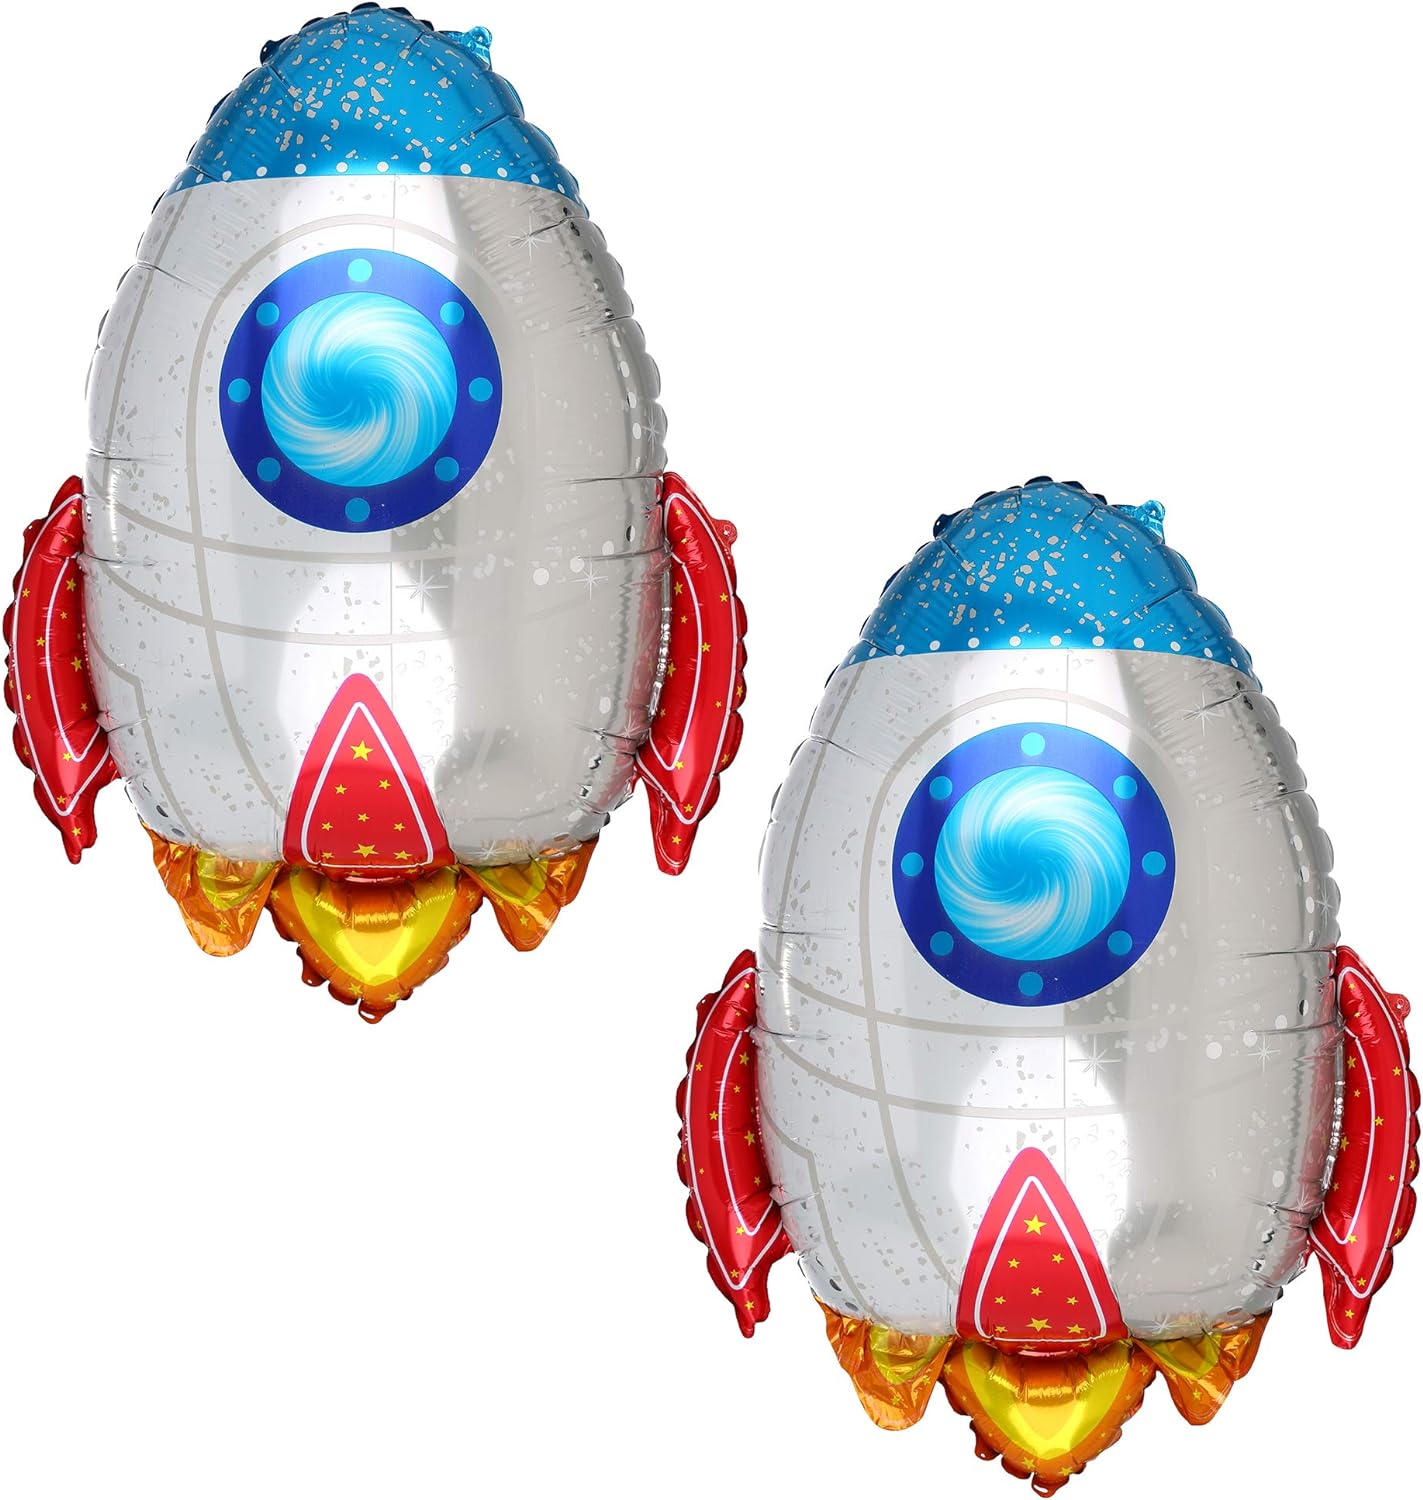 Rocket Shaped Balloon Outer Space Decorations Universe Space Theme